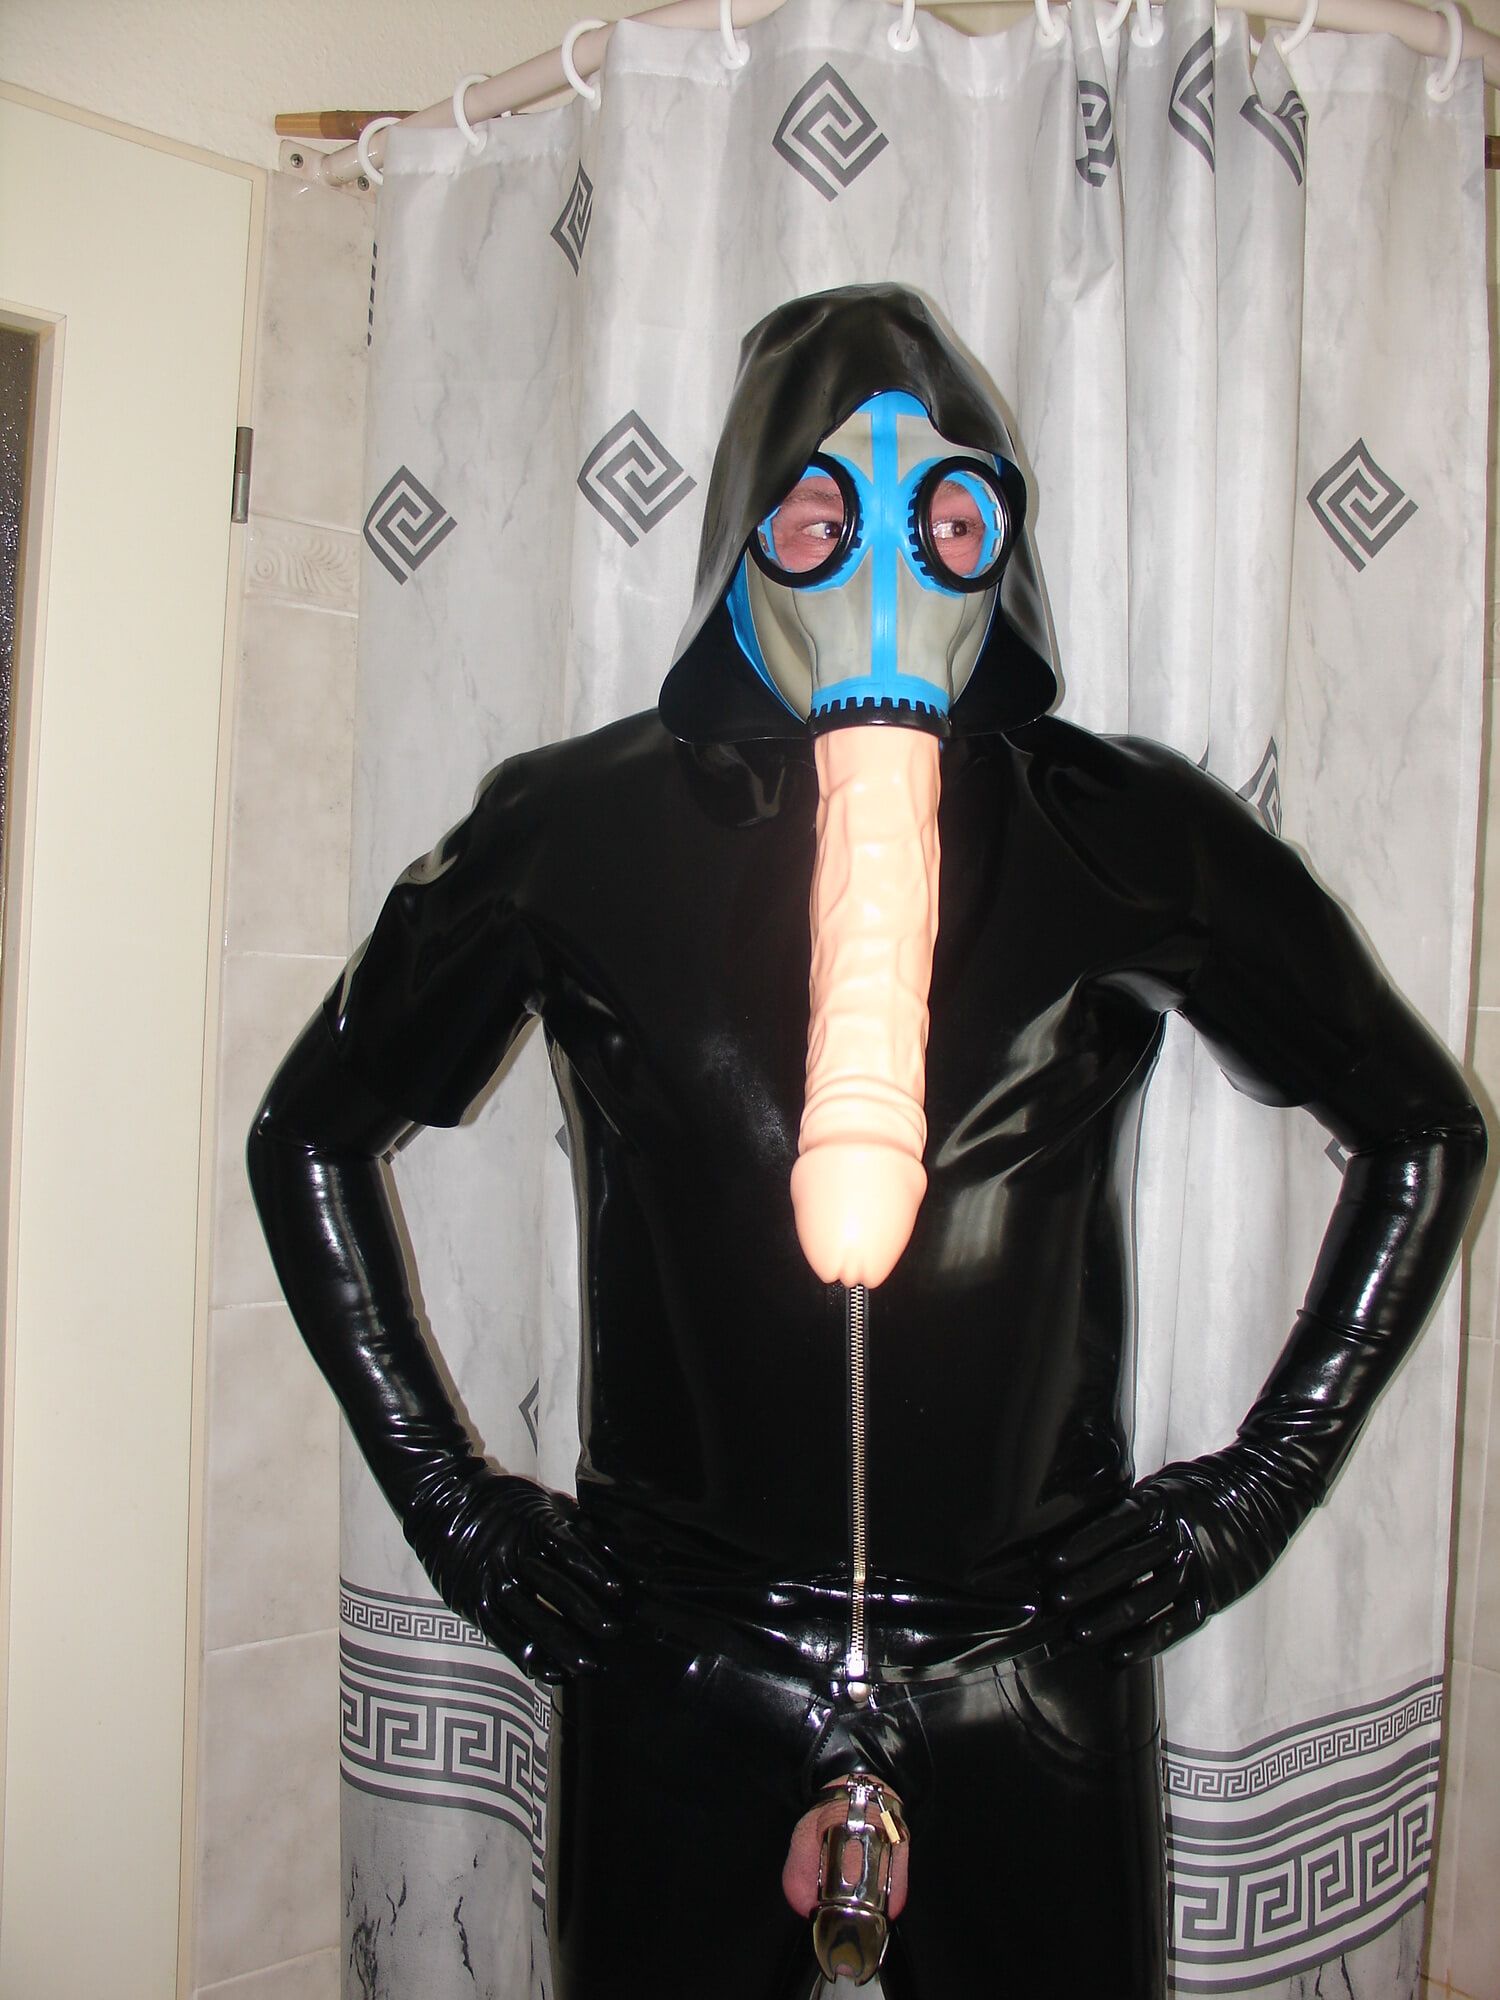 ME WITH LATEX SLEEVES, CONDOMS AND ENLARGER #2